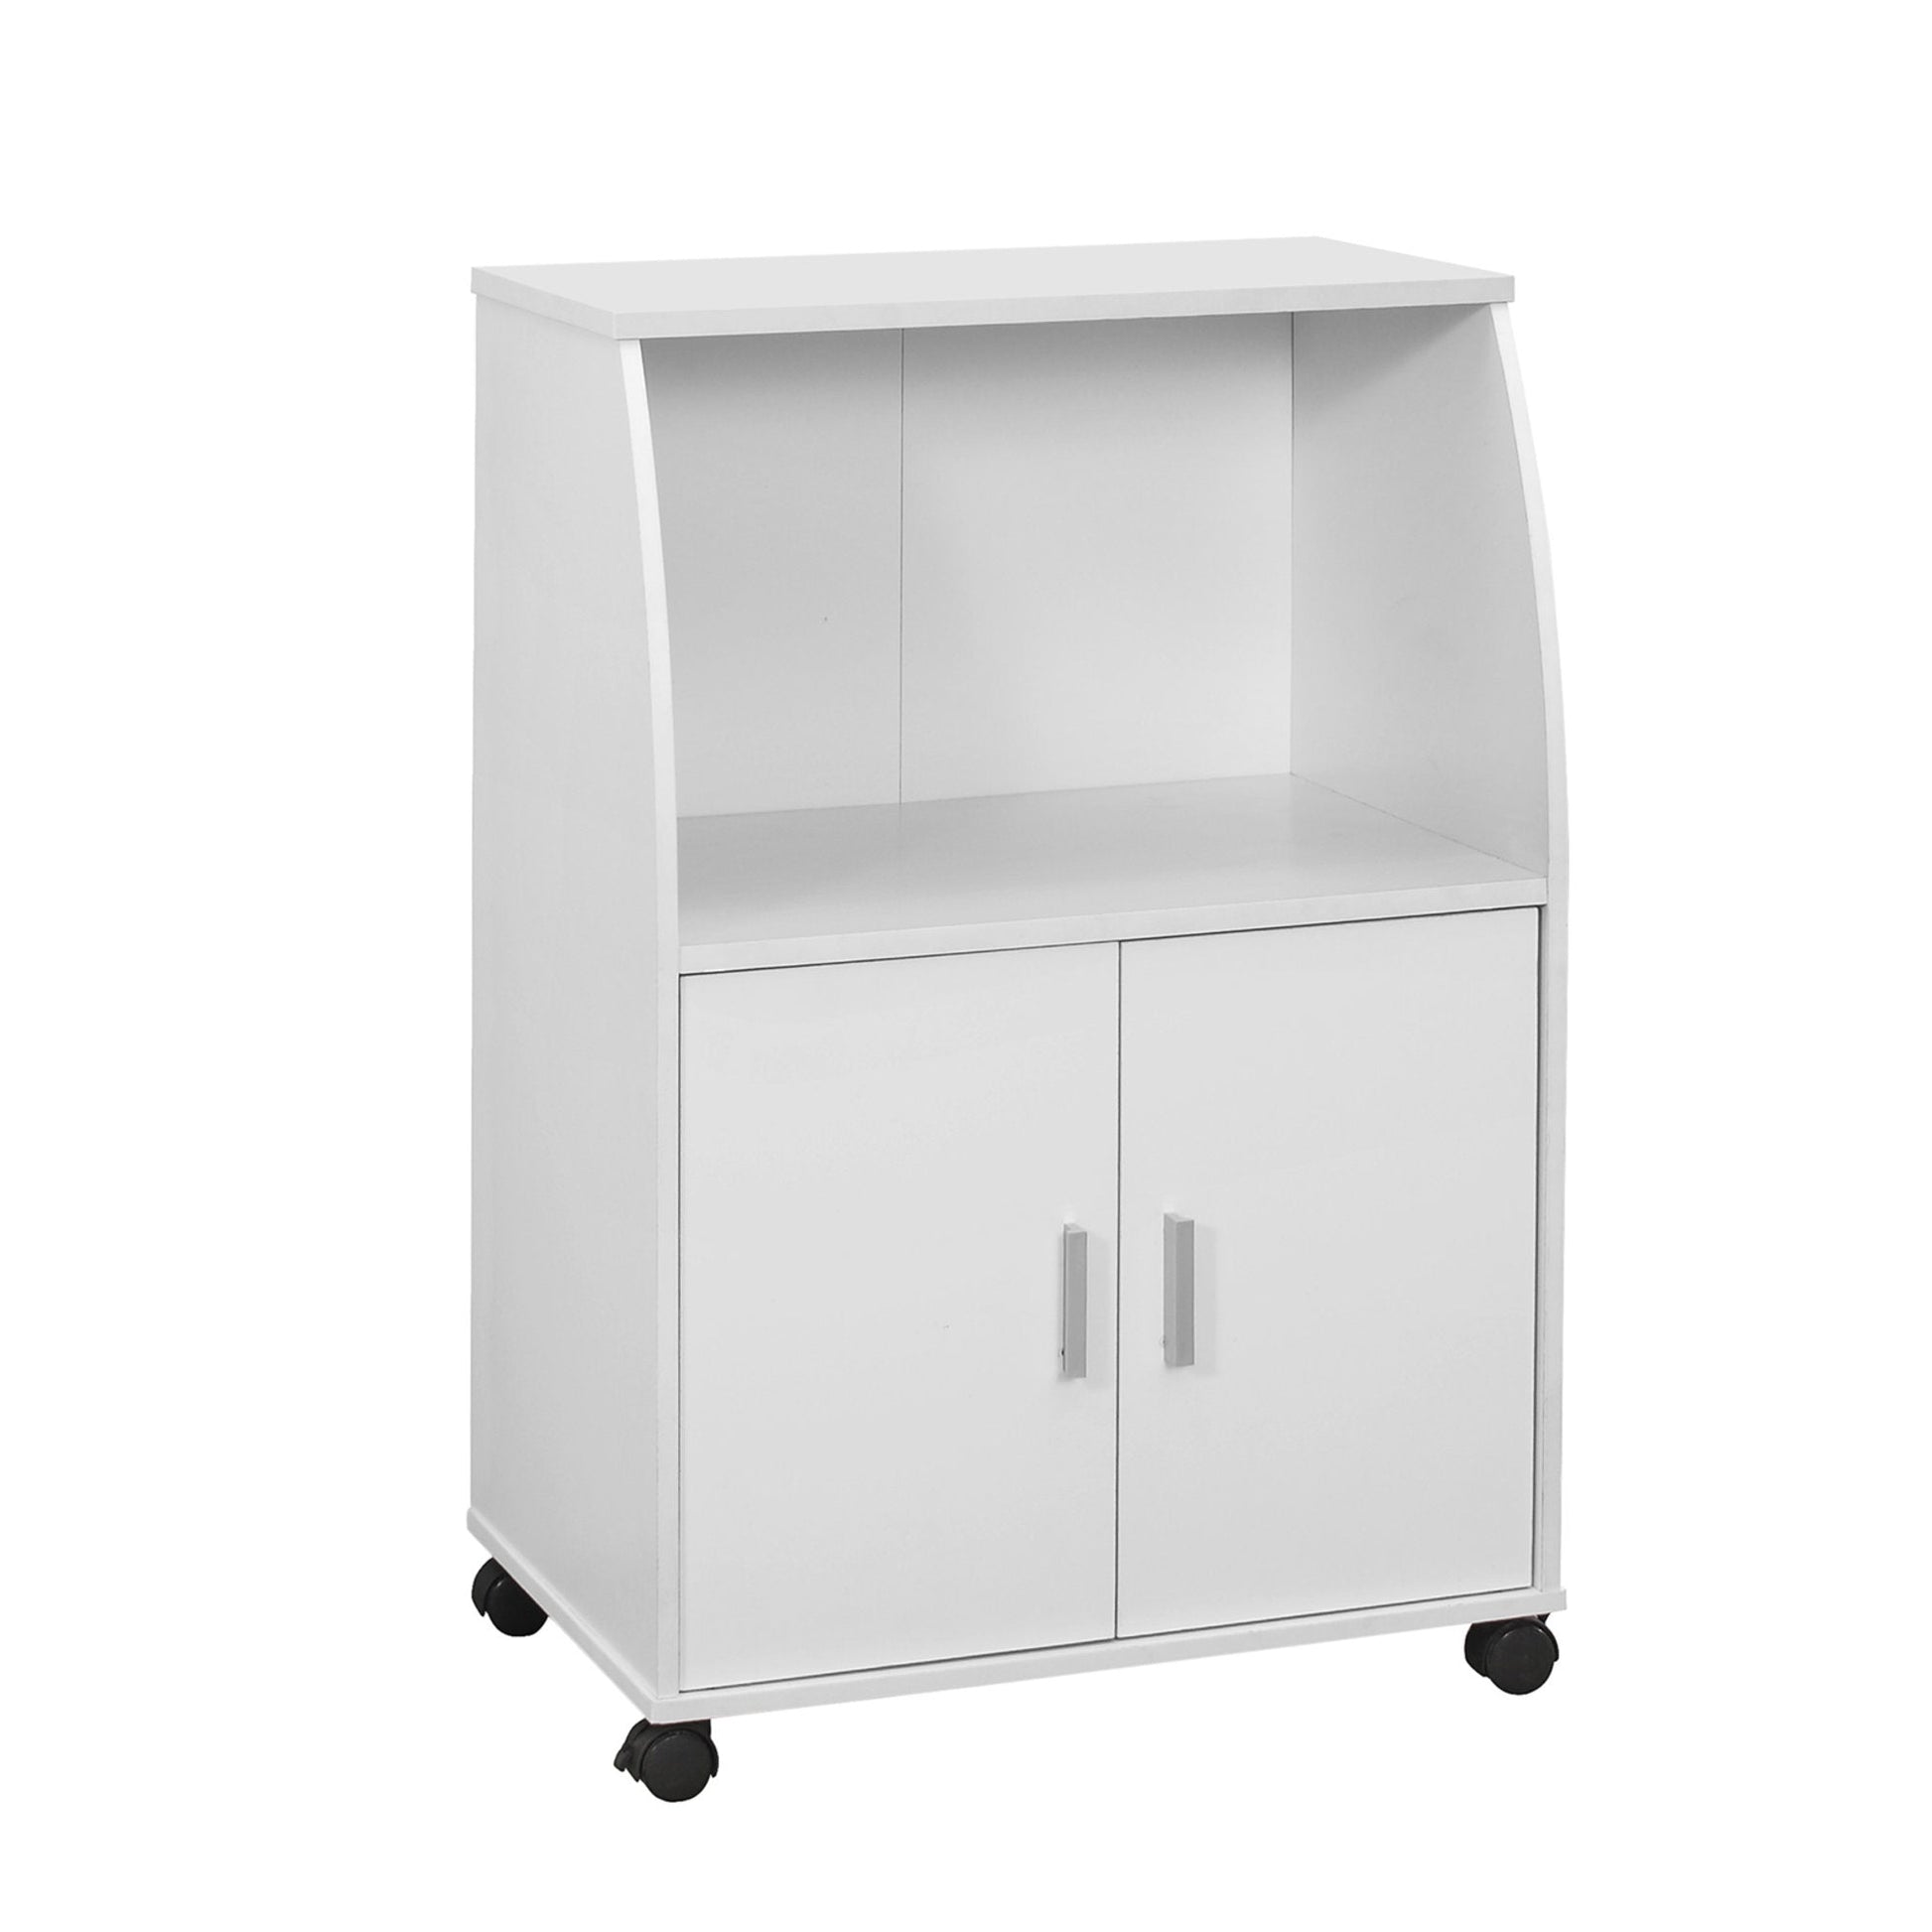 HomeRoots 15.25" x 22" x 33" Particle Board Laminate Kitchen Cart in White Finish